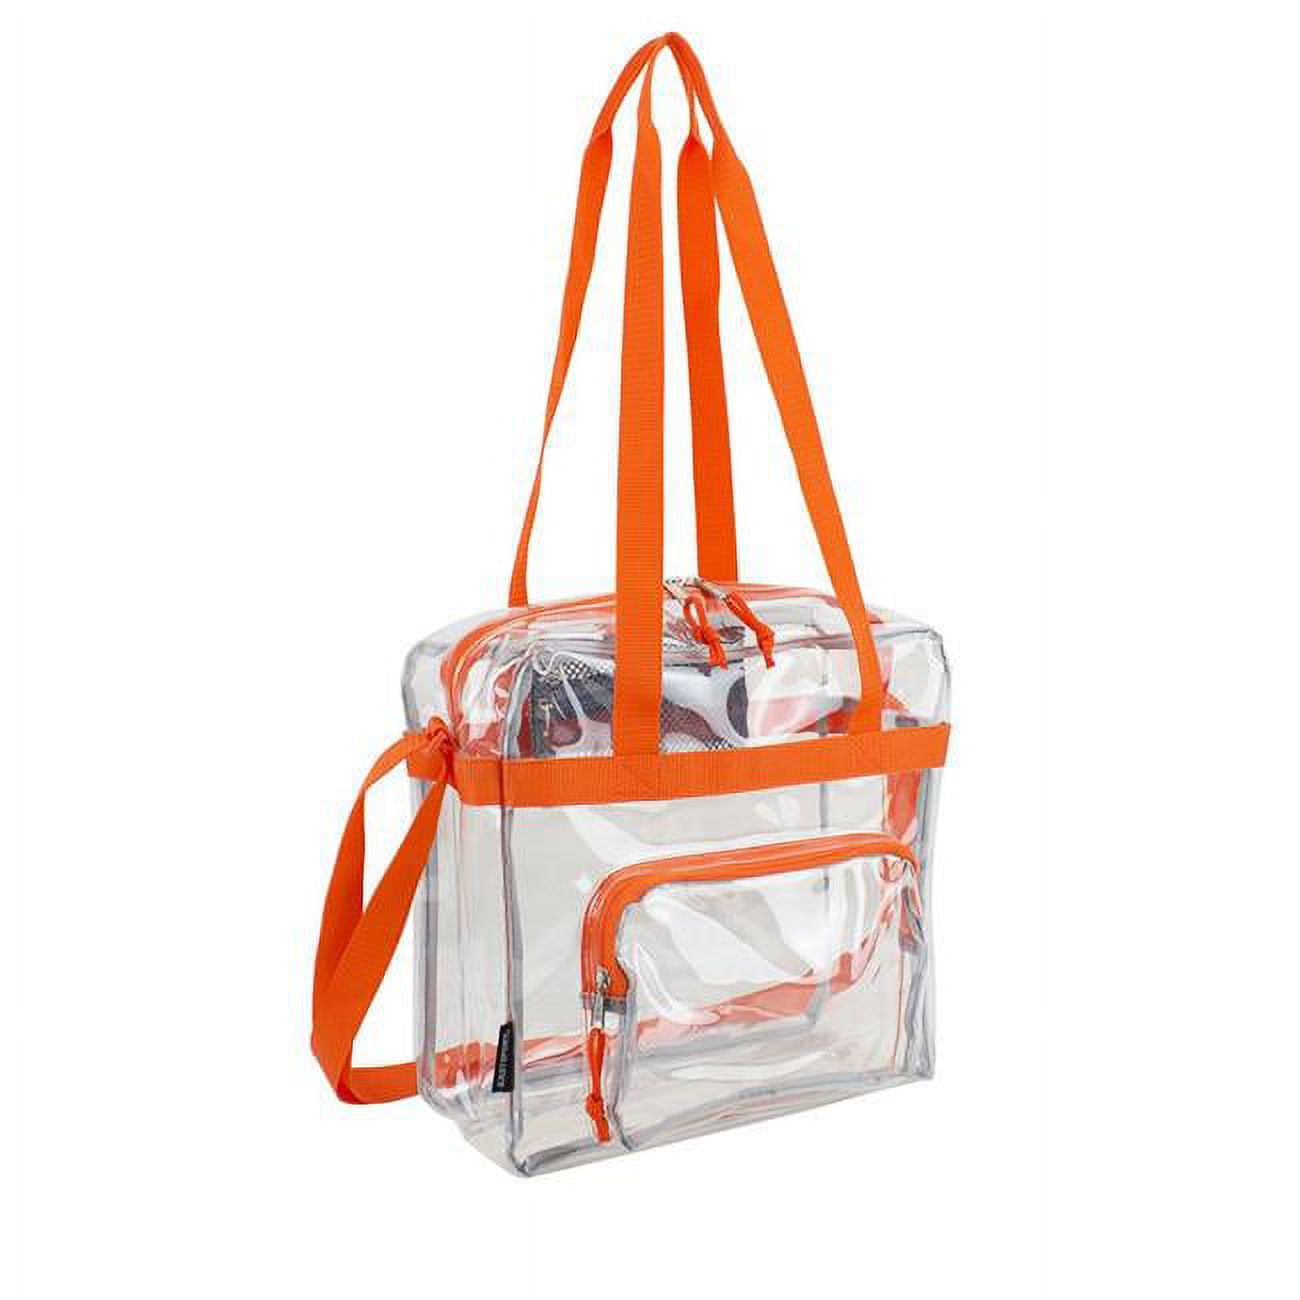 2315277 Clear Nfl Approved Stadium Tote, Orange - Case Of 12 - 12 Per Pack